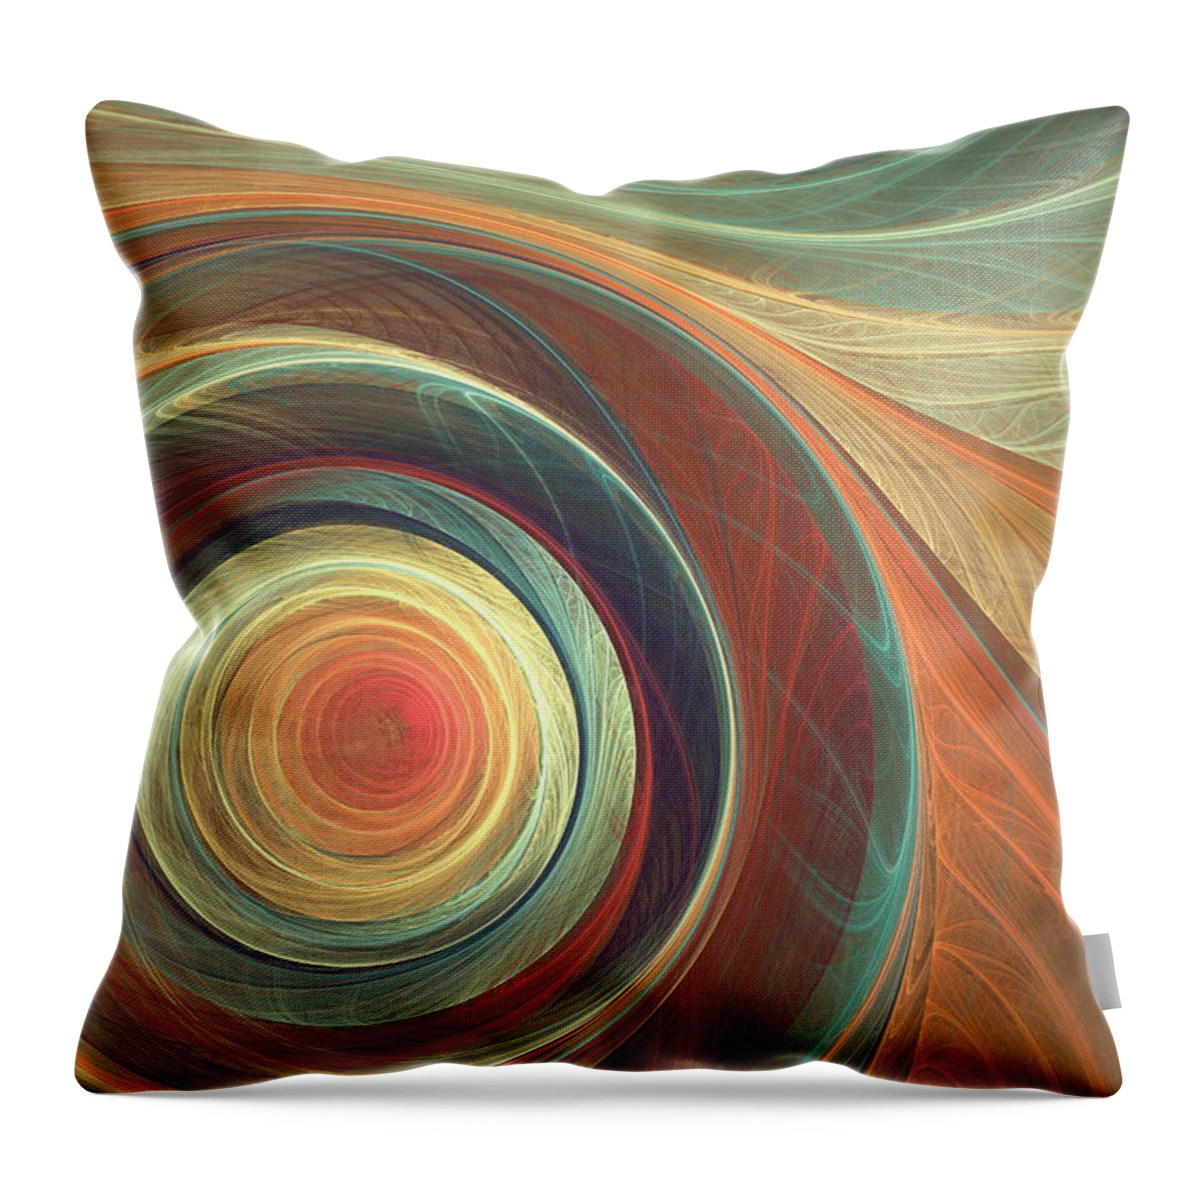 Pastel Color Throw Pillow featuring the digital art Hope of elegance by Martin Capek